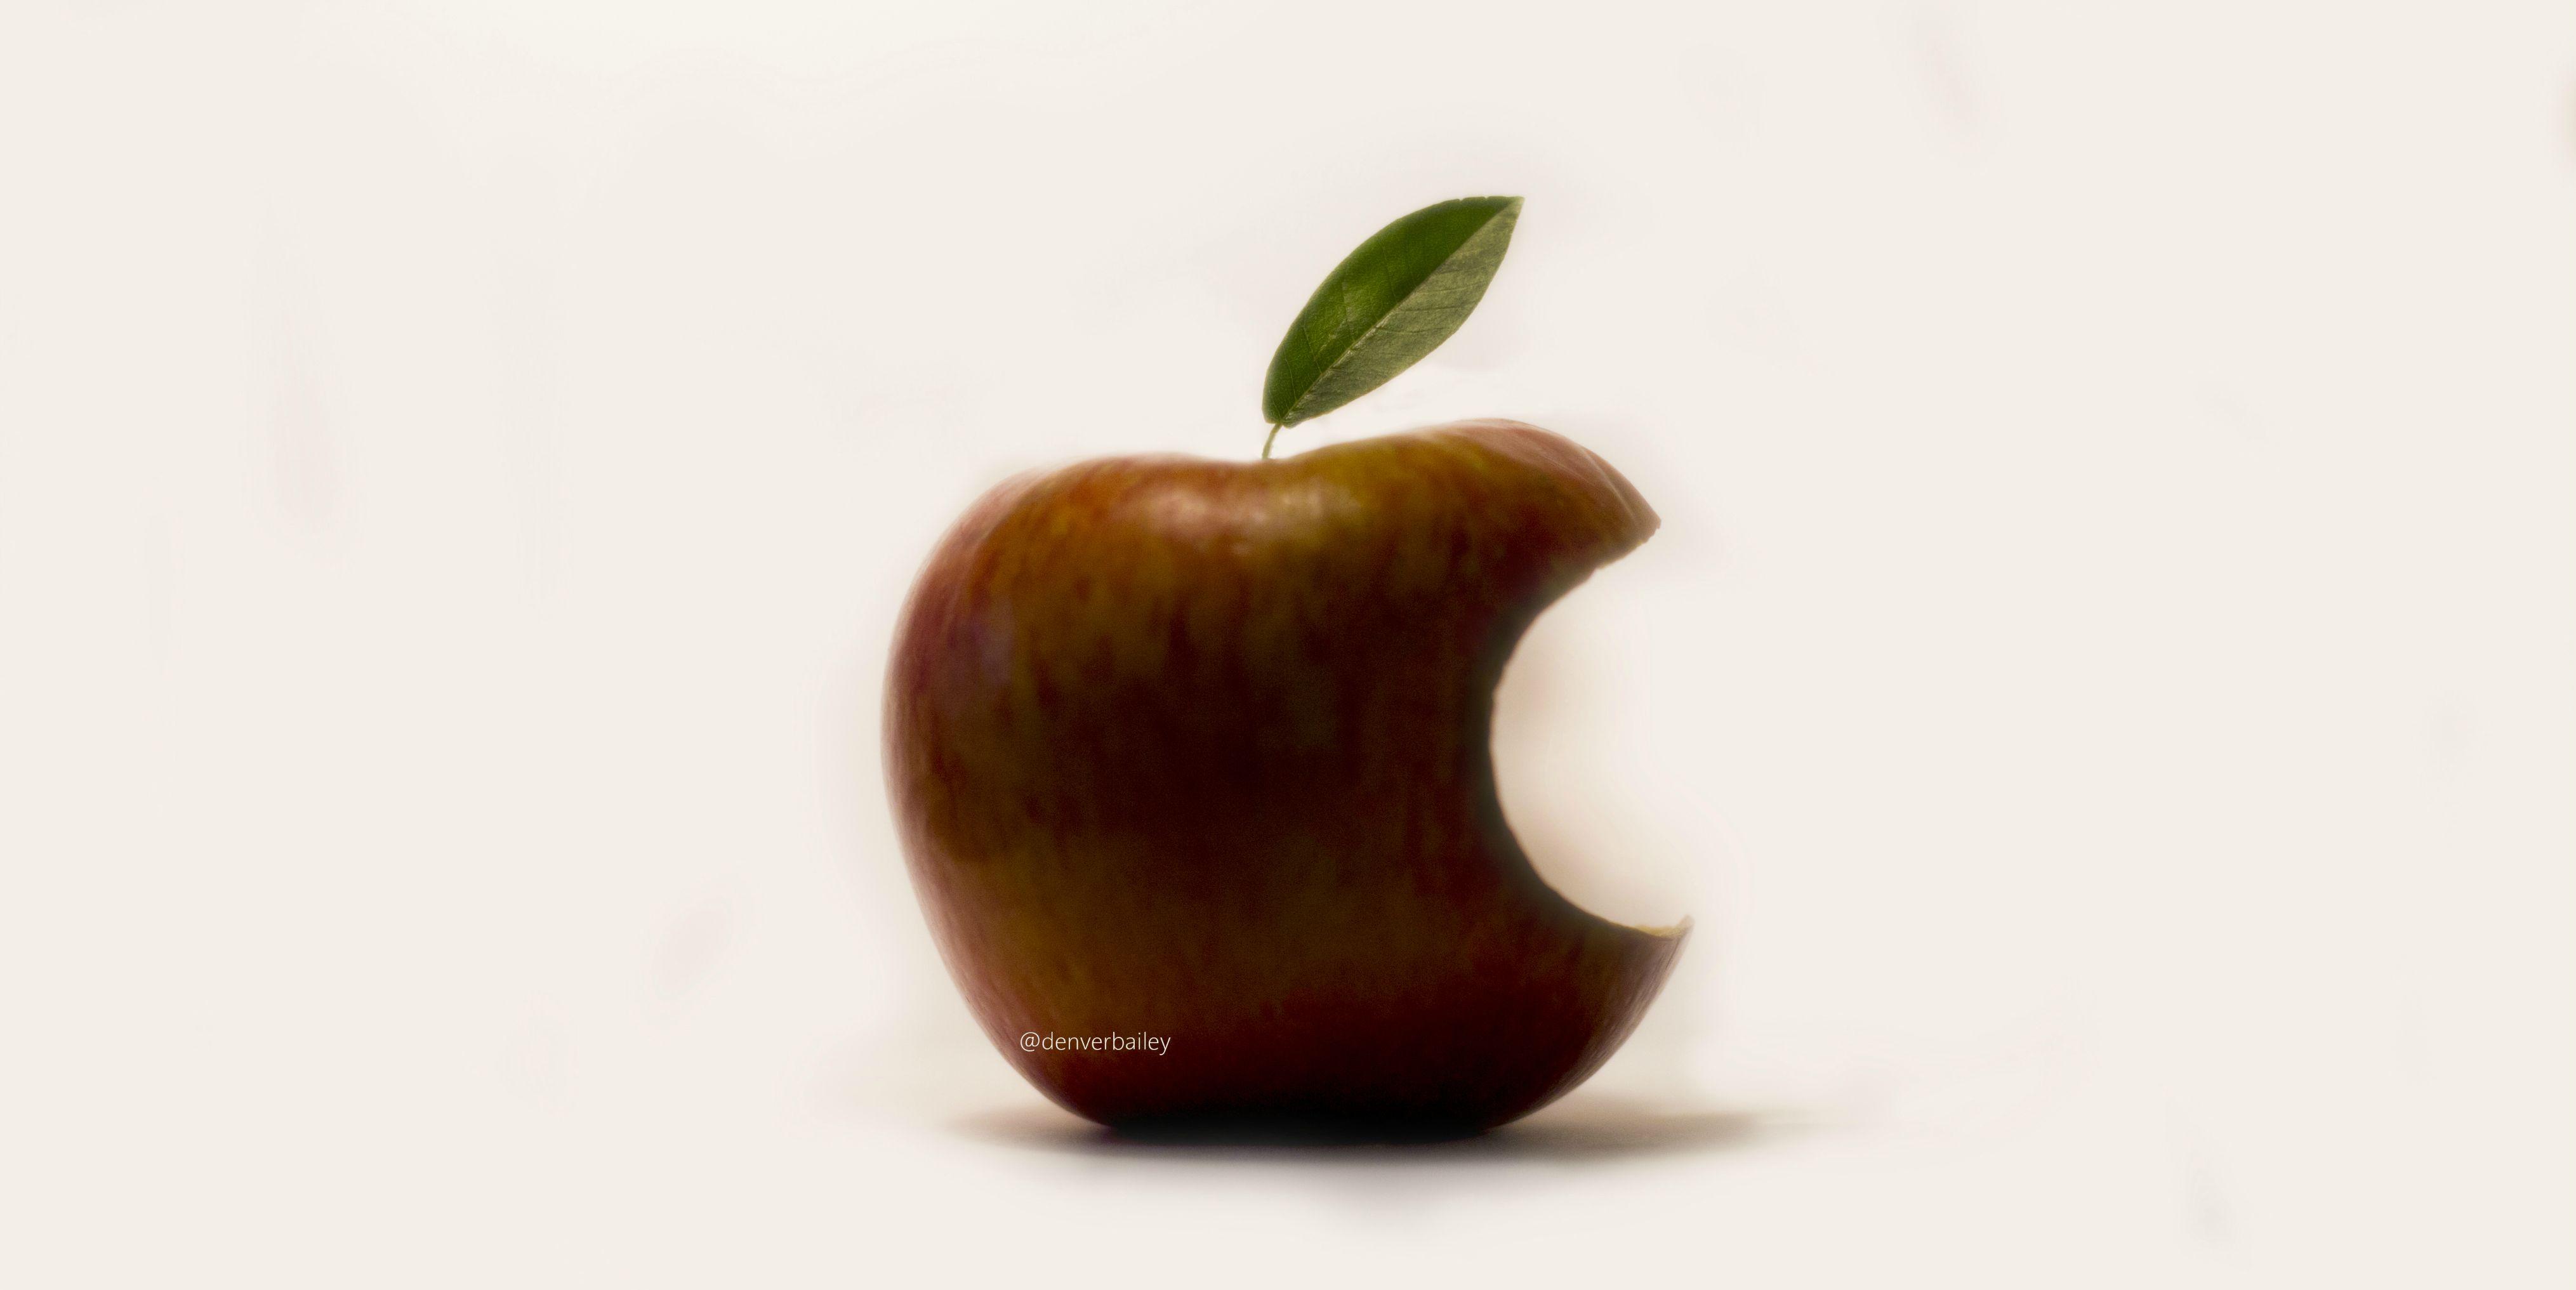 Real Apple Logo - Apple Logo in Real Life